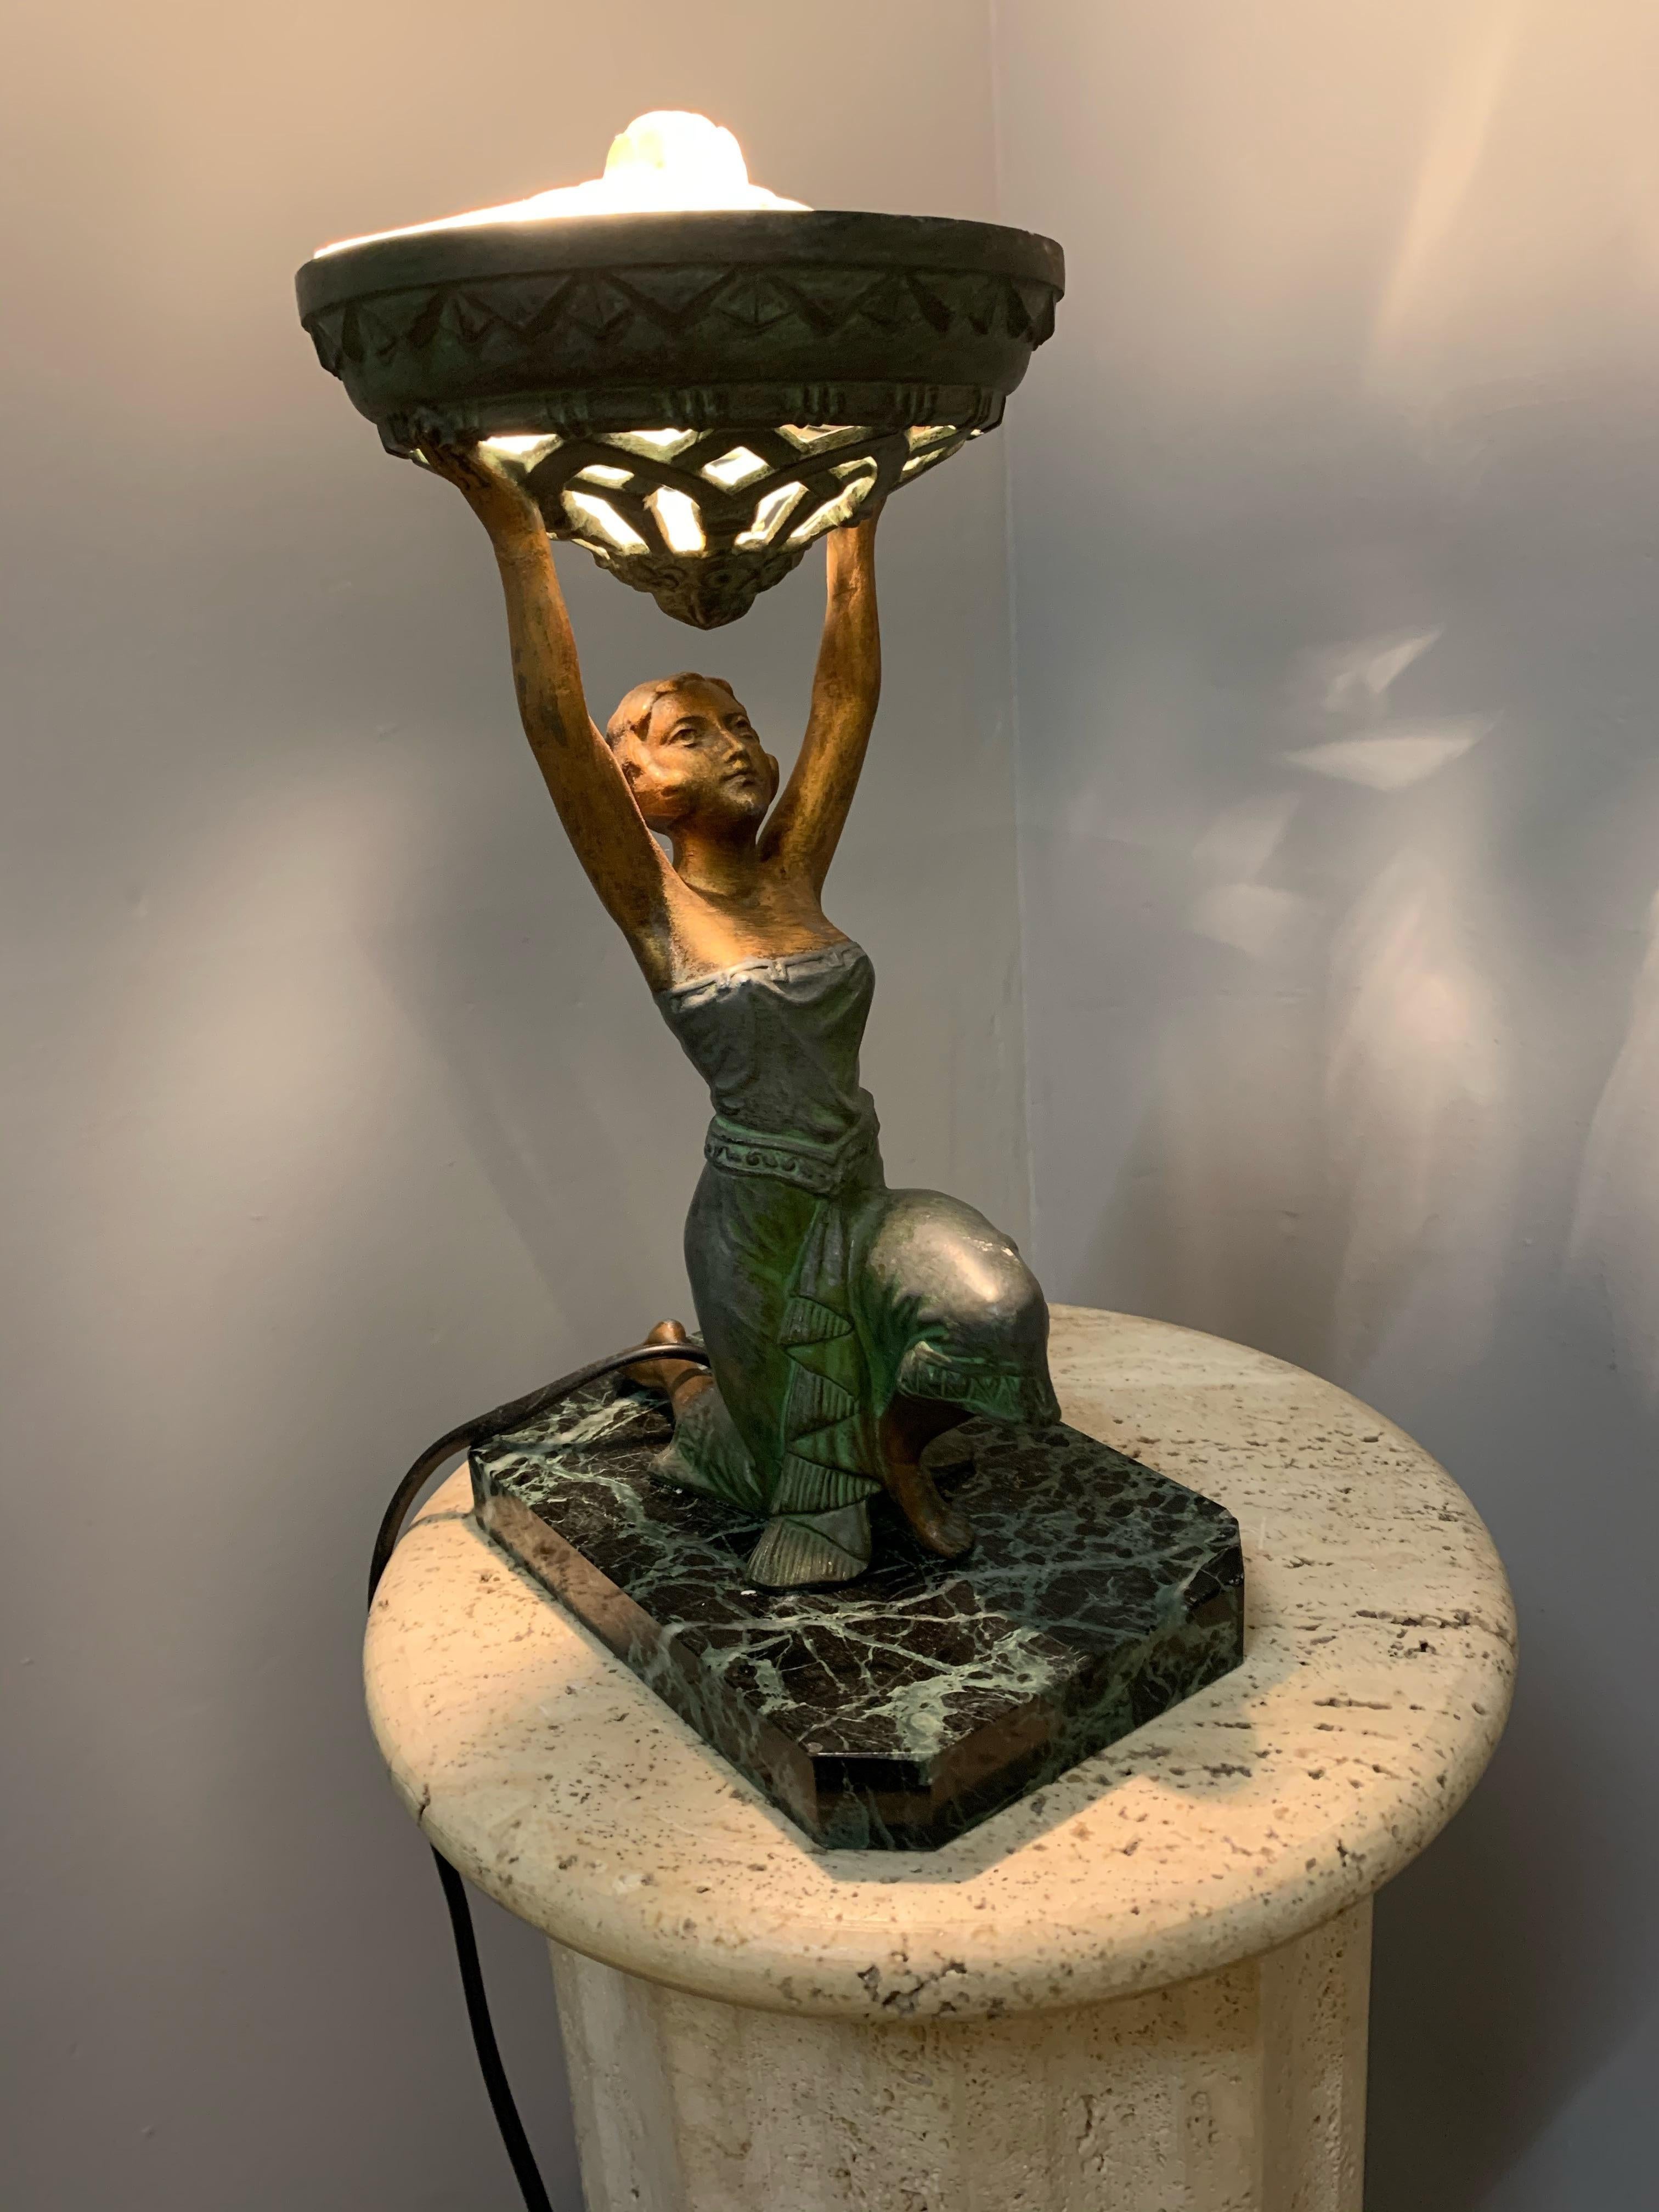 Egyptian revival Art Deco table lamp from circa 1925.

This beautifully patinated, sculptural lamp is still in wonderful condition. The metal female is dressed in the typical style of the roaring twenties. A period in which the global design